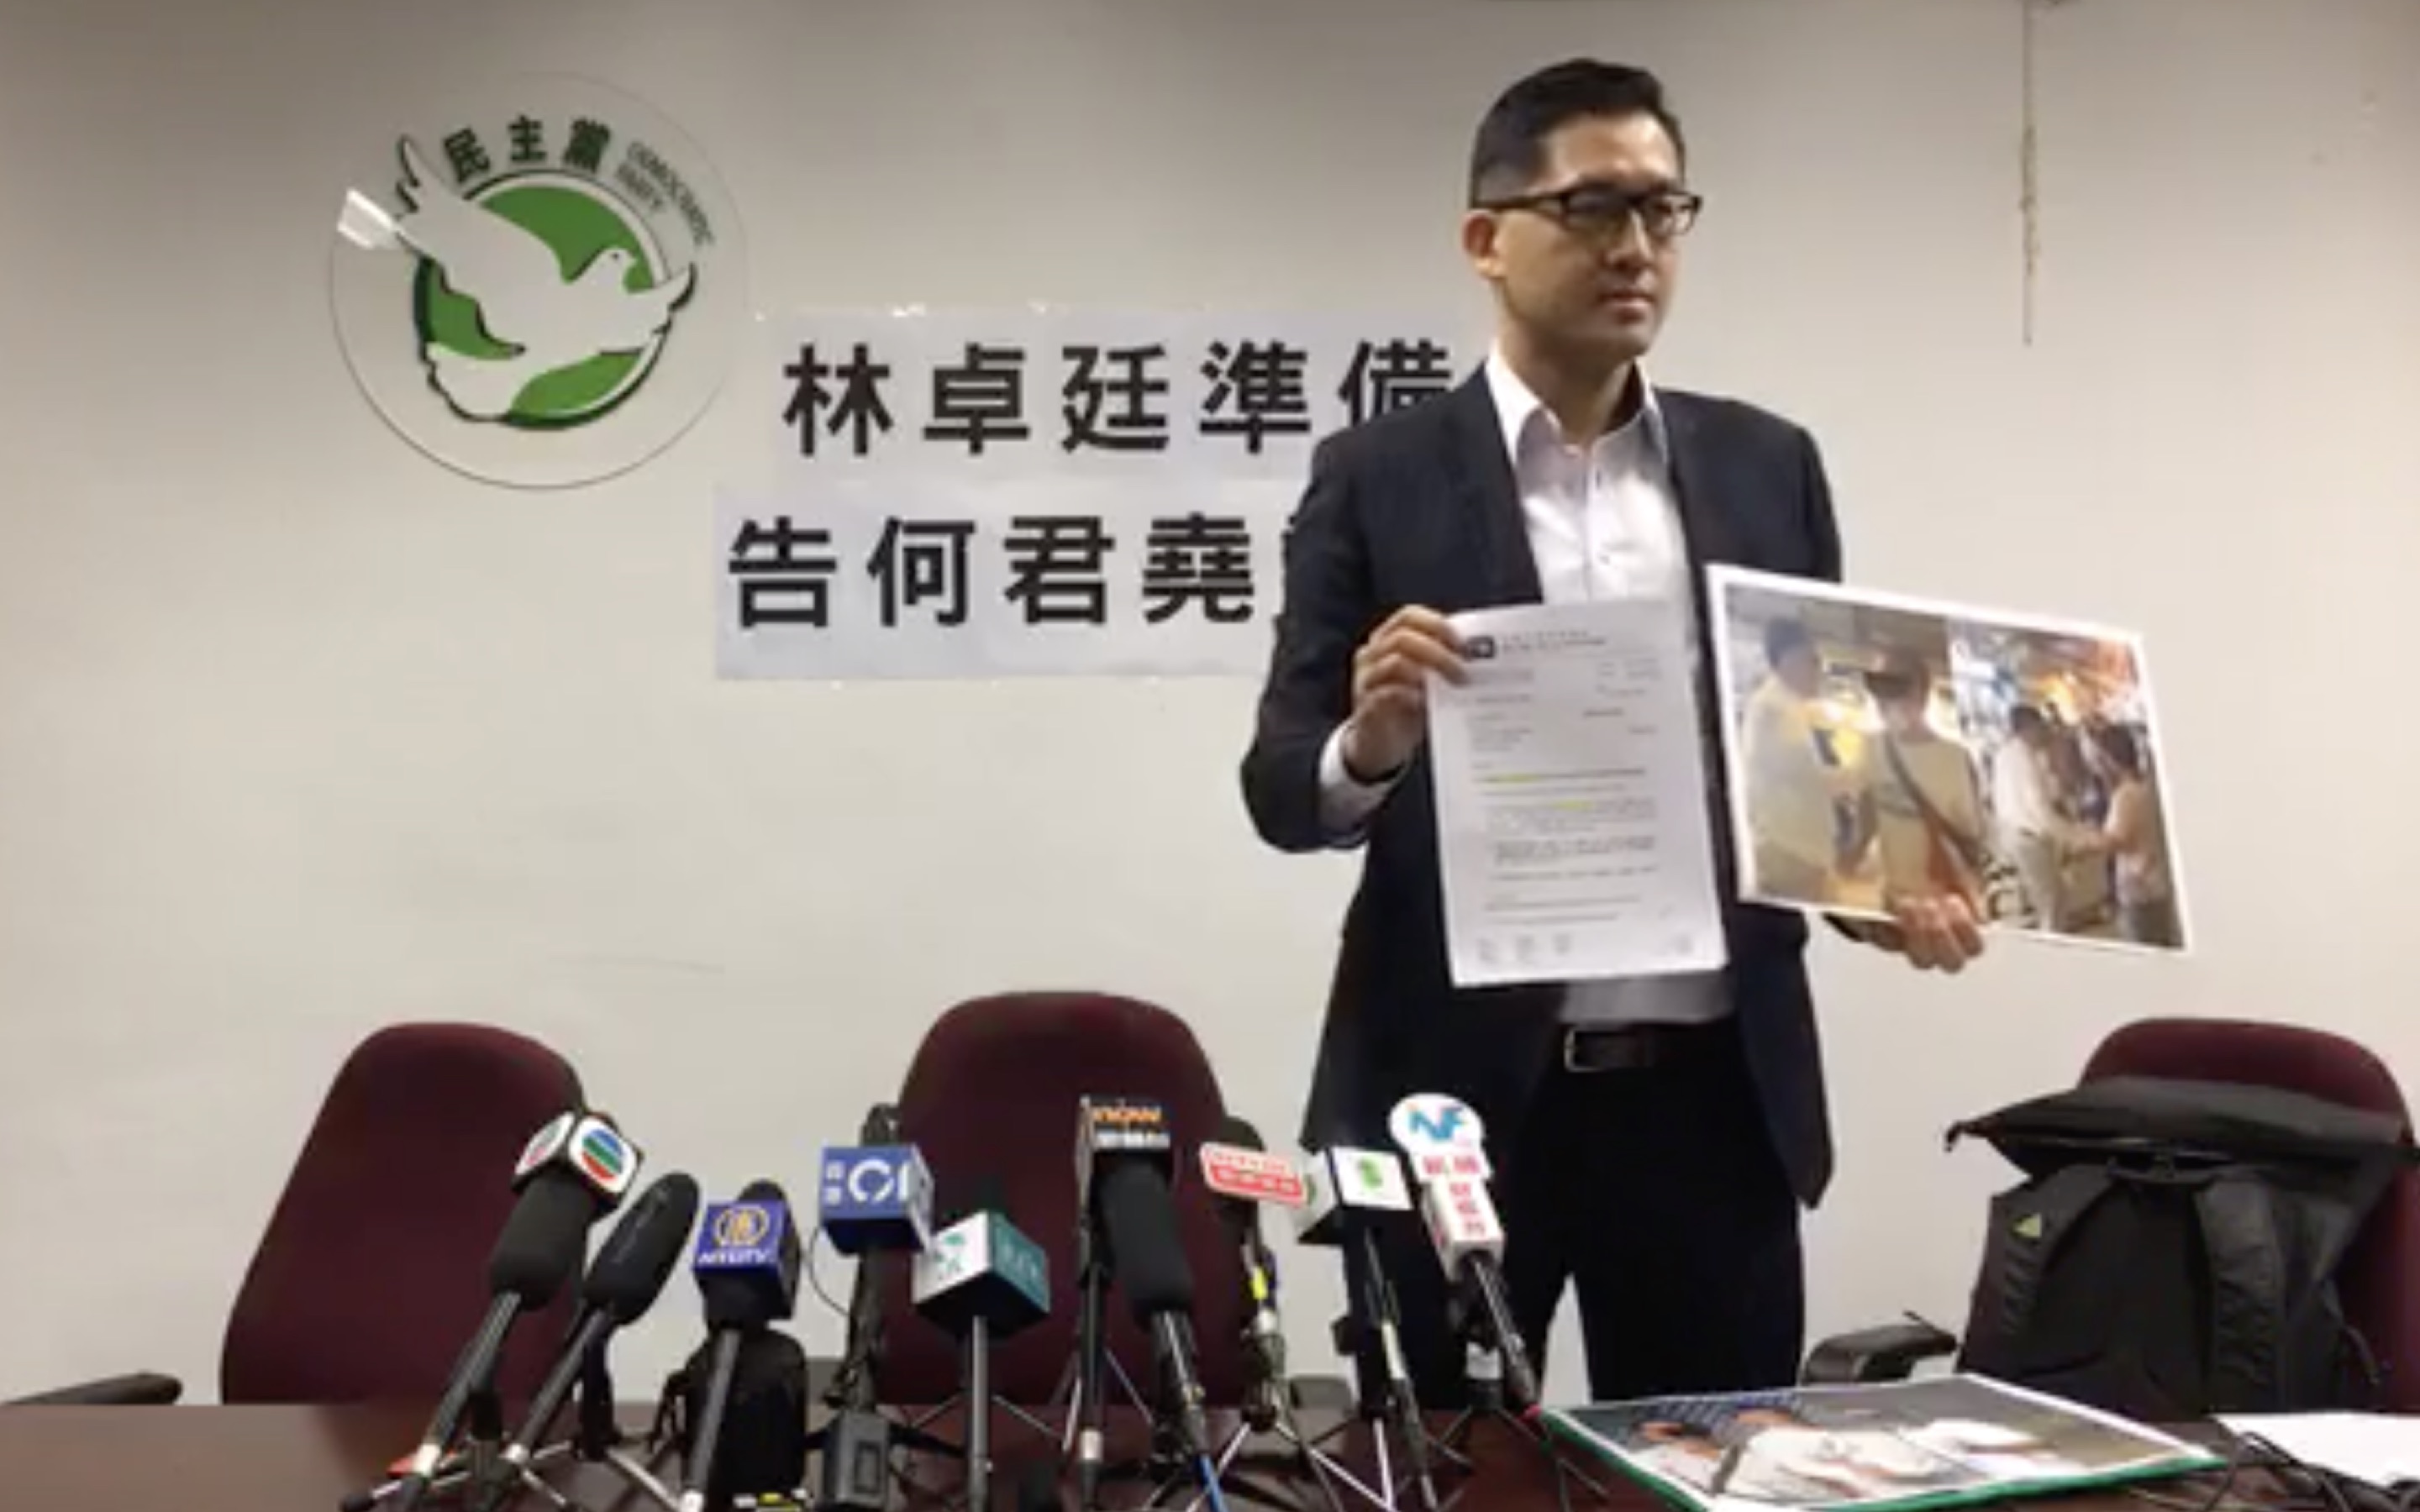 Lam Cheuk-ting holds up a copy of a legal letter confirming he’s suing pro-Beijing lawmker Junius Ho for defamation. Screengrab via Facebook video/Lam Cheuk-ting.